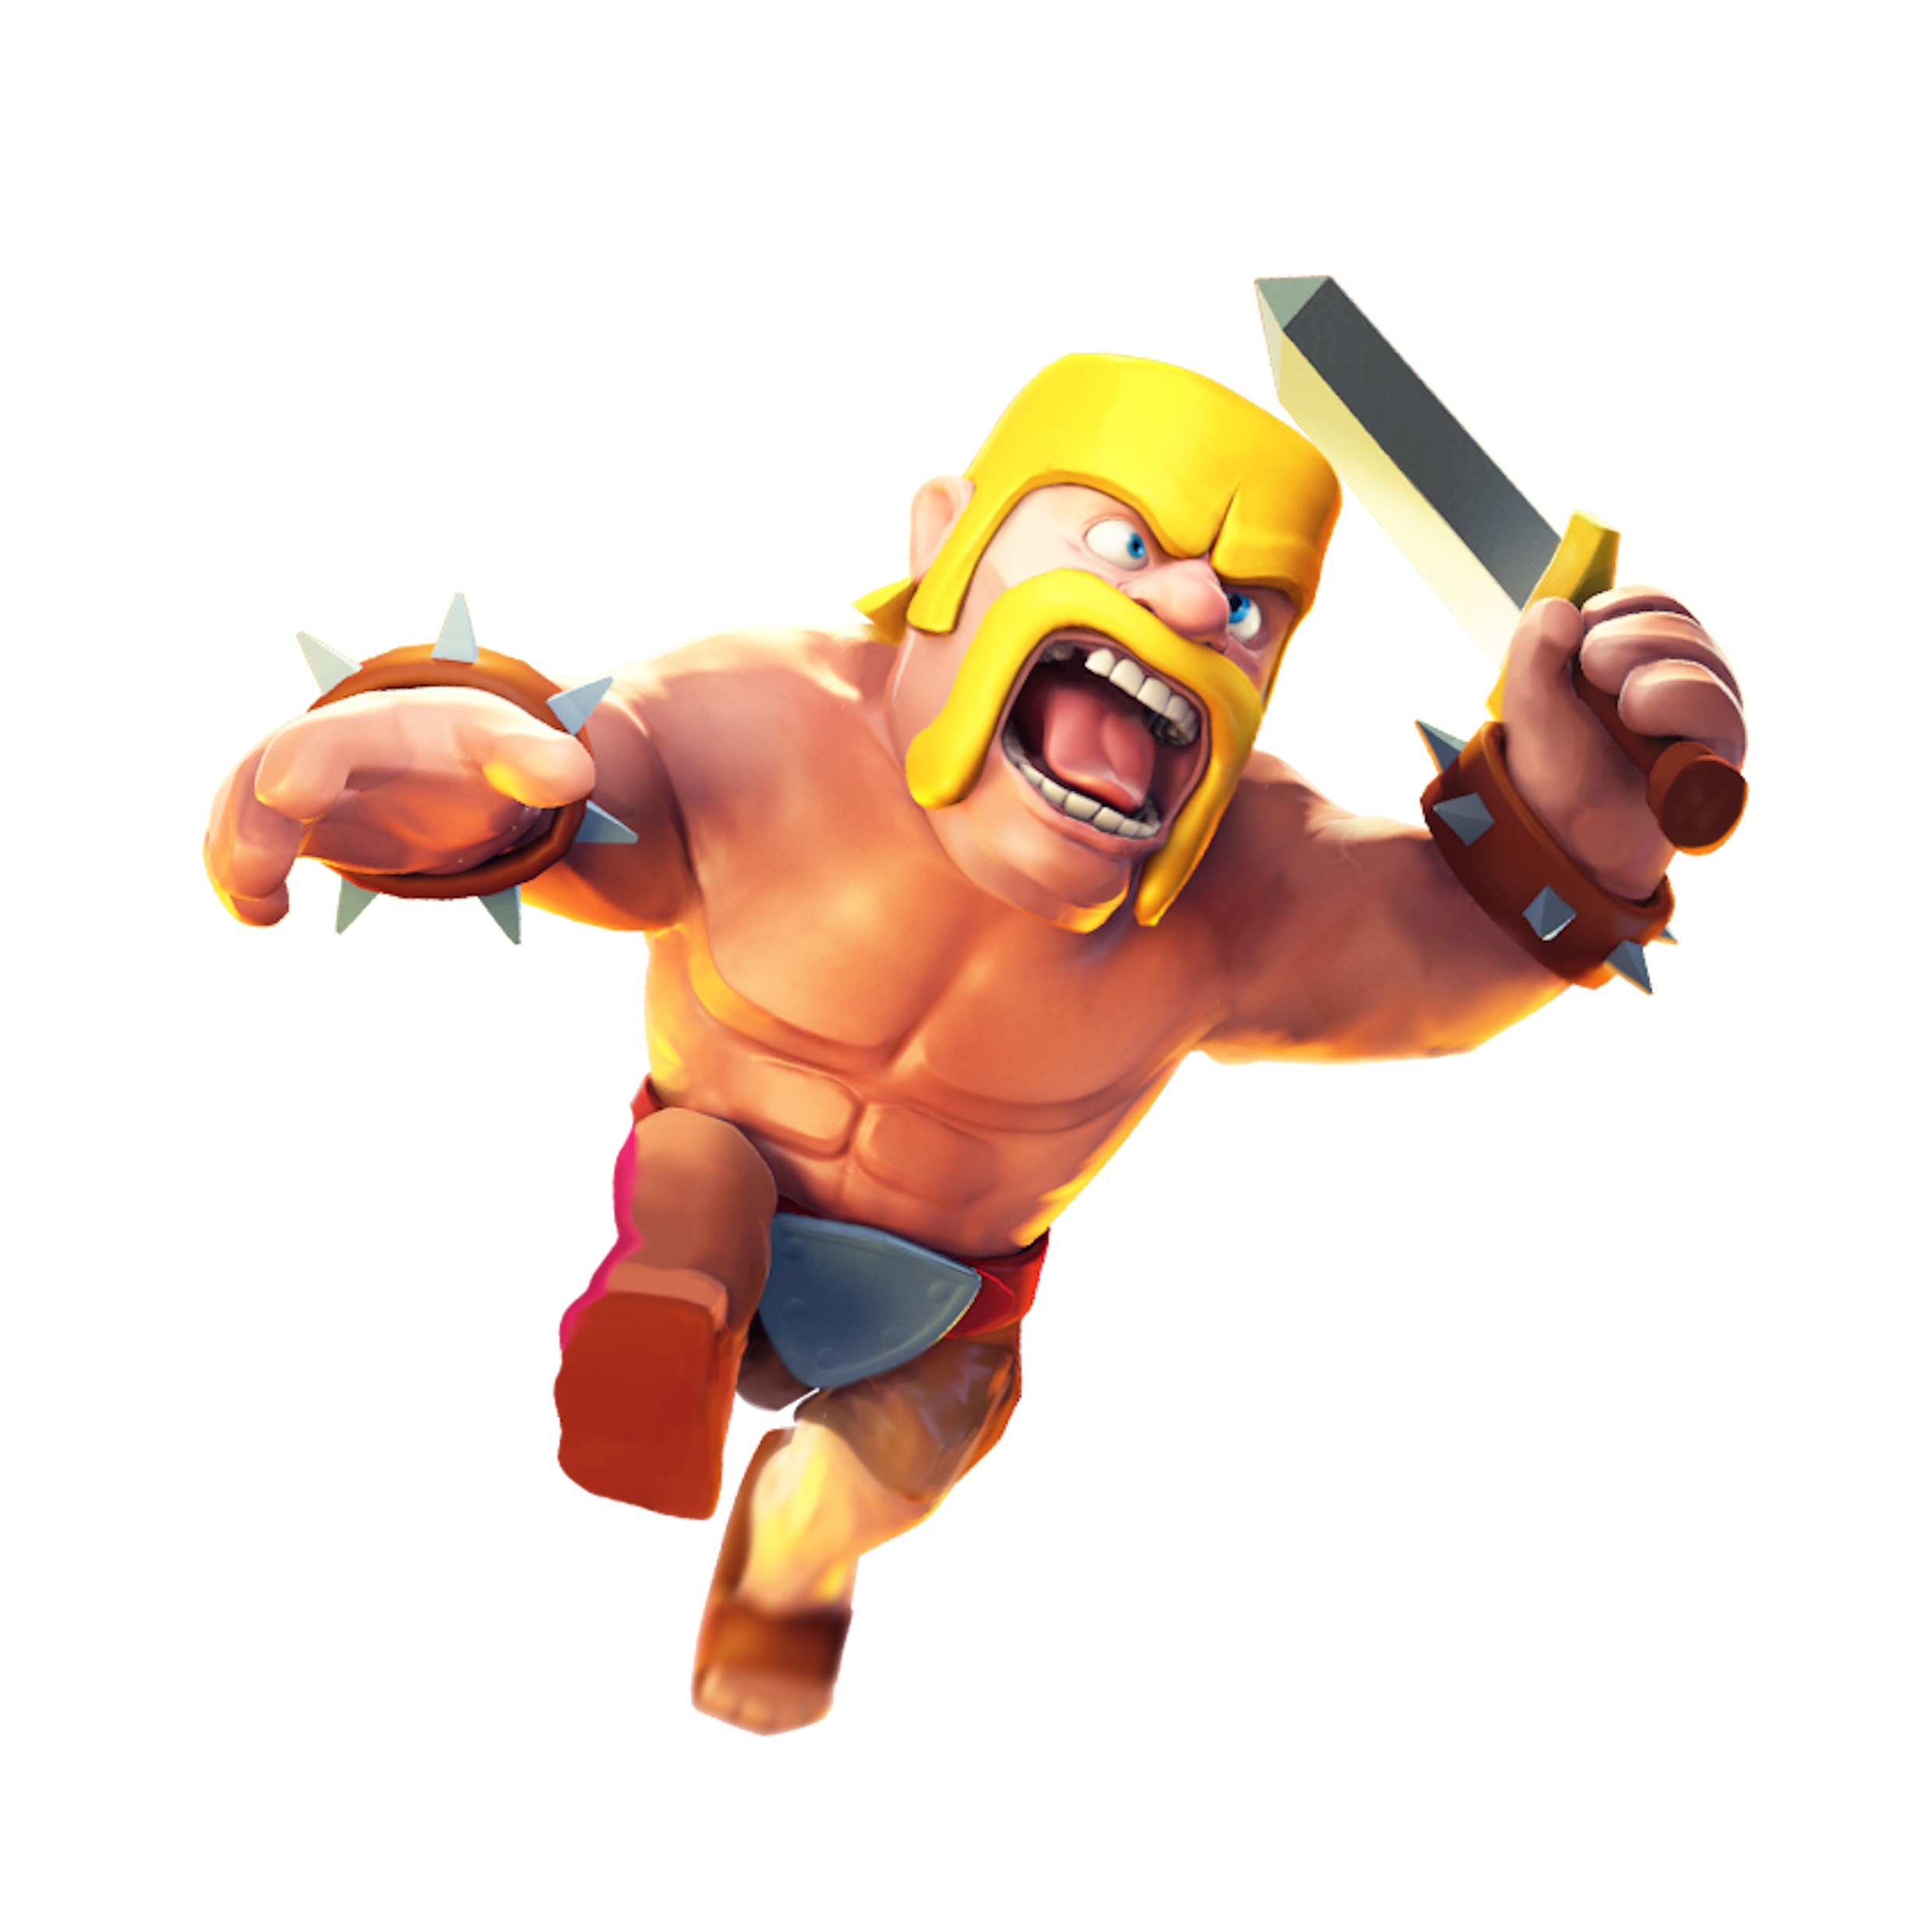 Clash of clans images